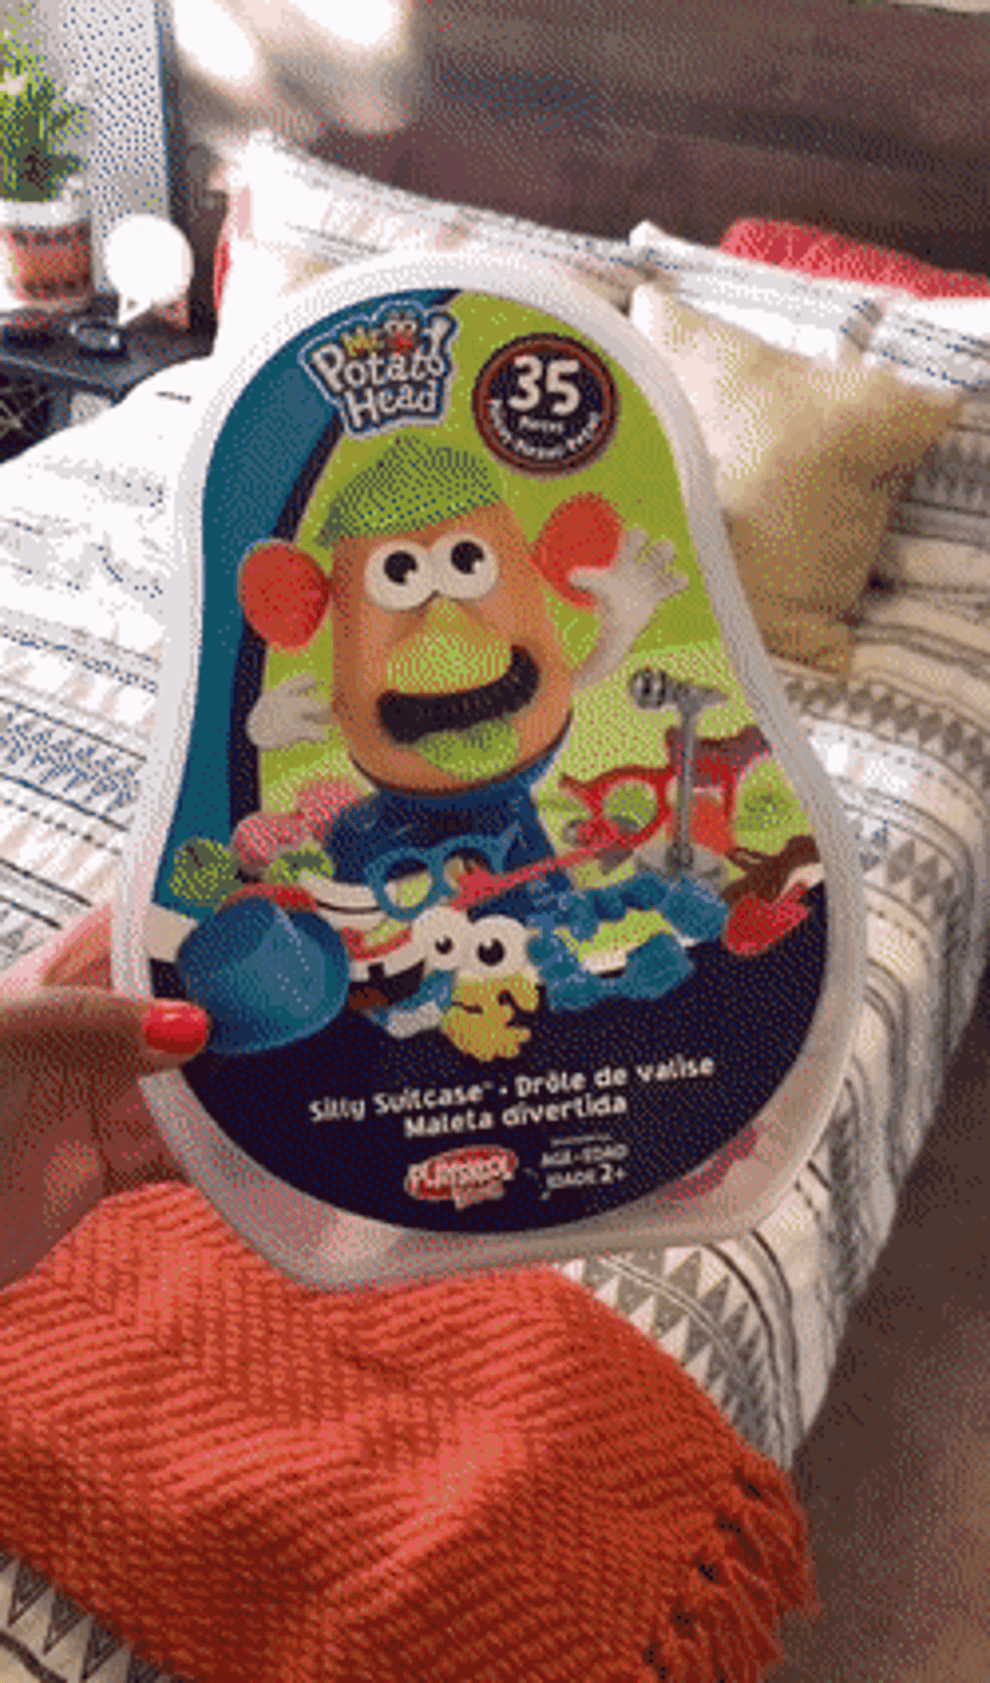 A gif of someone showing off Mr. Potato Head.